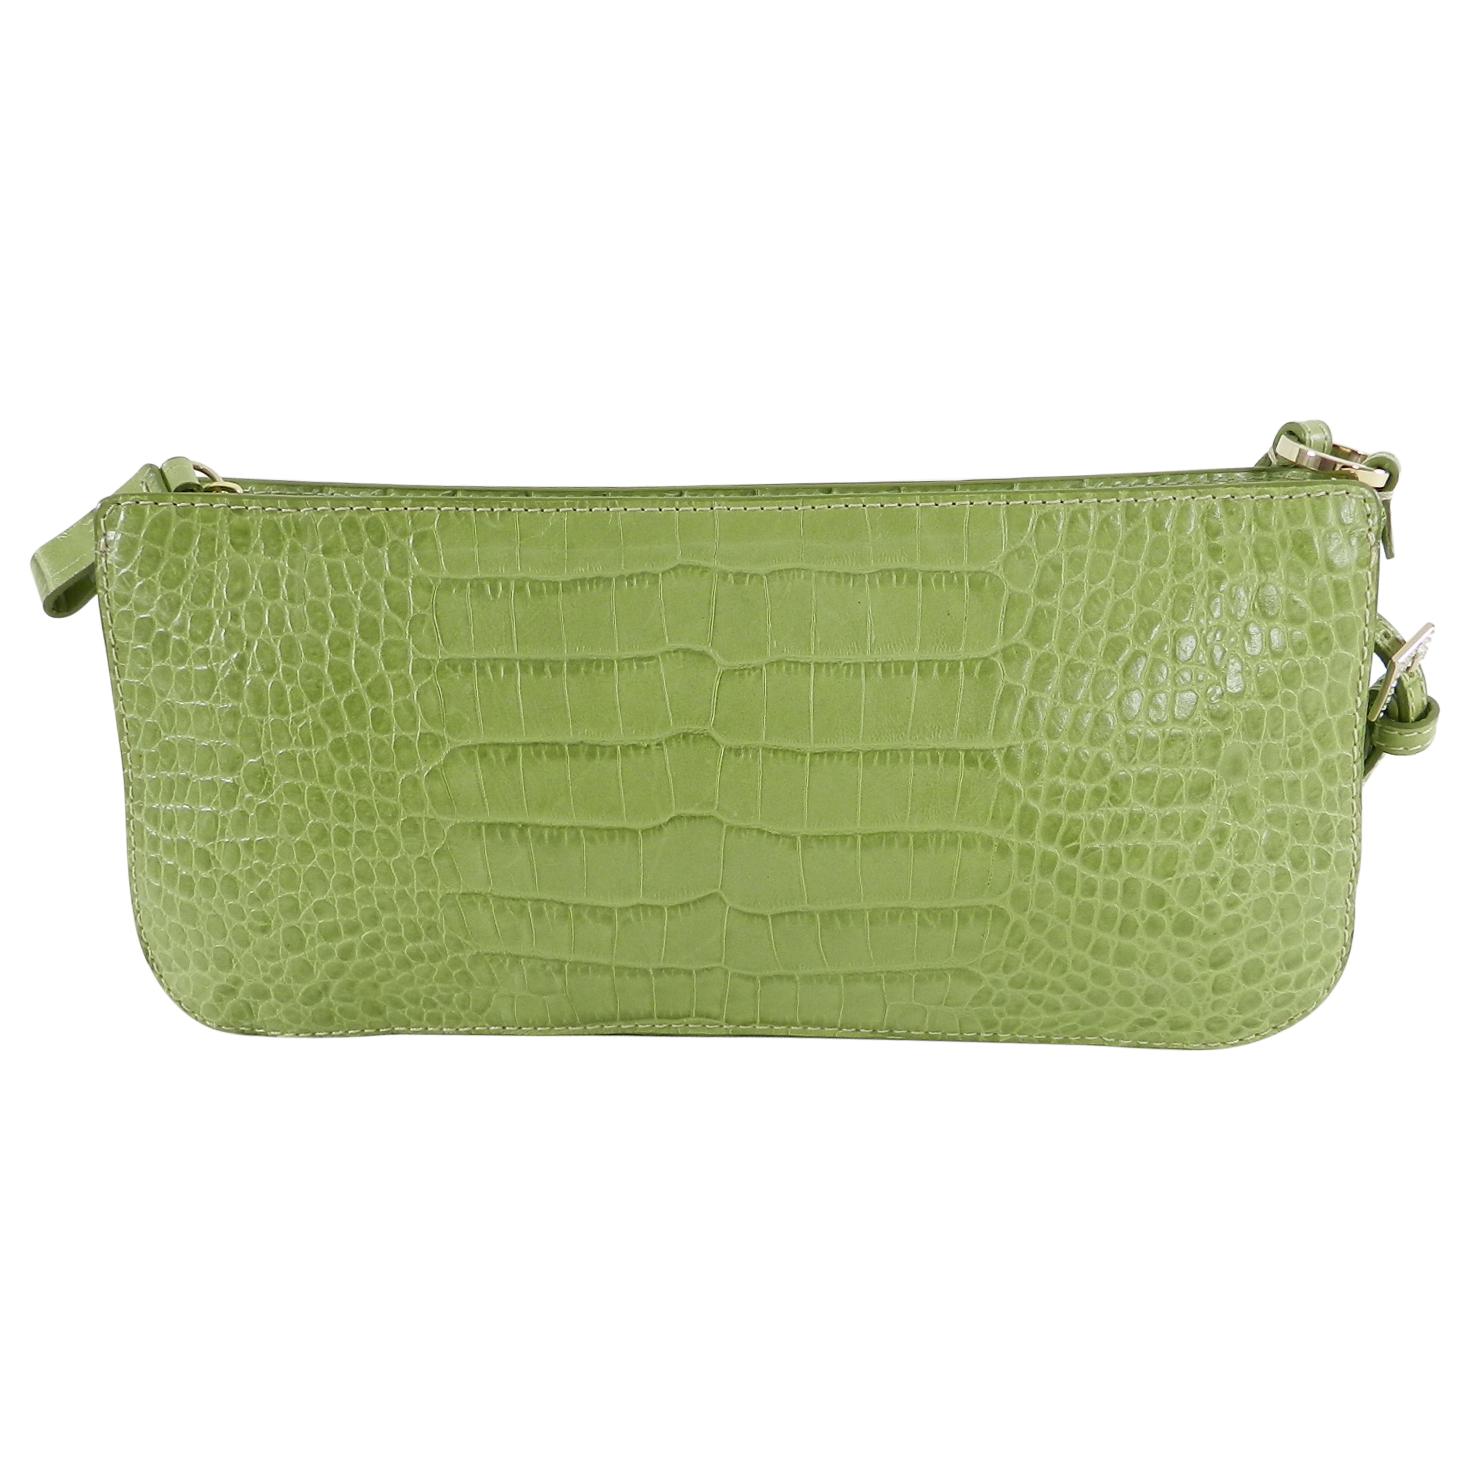 Valentino Green Croc Embossed Leather Jewel Wristlet Bag.  Goldtone metal top zipper, strass rhinestone decorated wristlet in green, pink, clear.  Includes care card and duster. Excellent clean pre-owned - only carried a few times. Measures 11 x 5 x